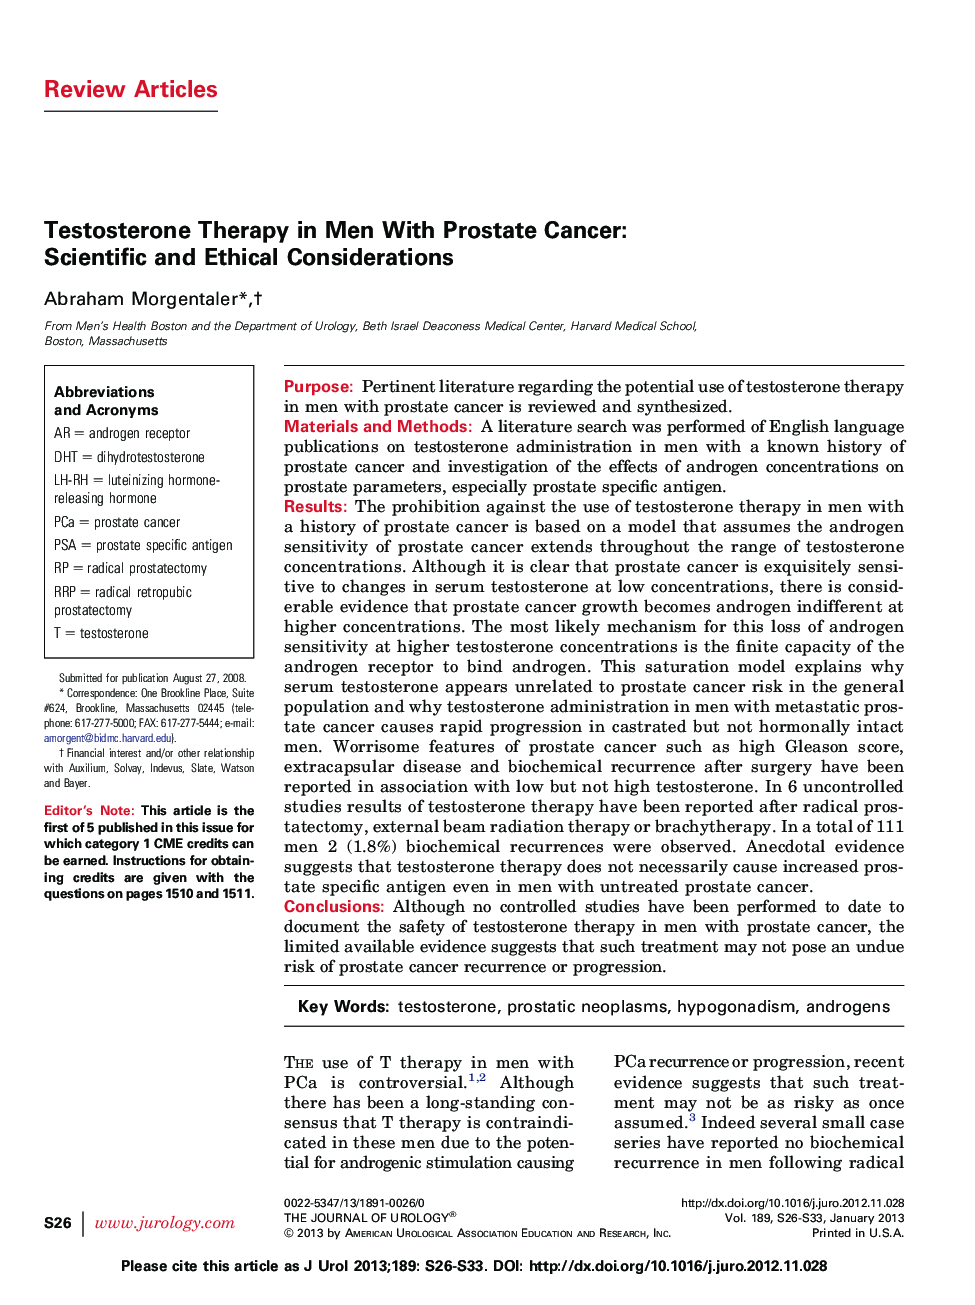 Testosterone Therapy in Men With Prostate Cancer: Scientific and Ethical Considerations 